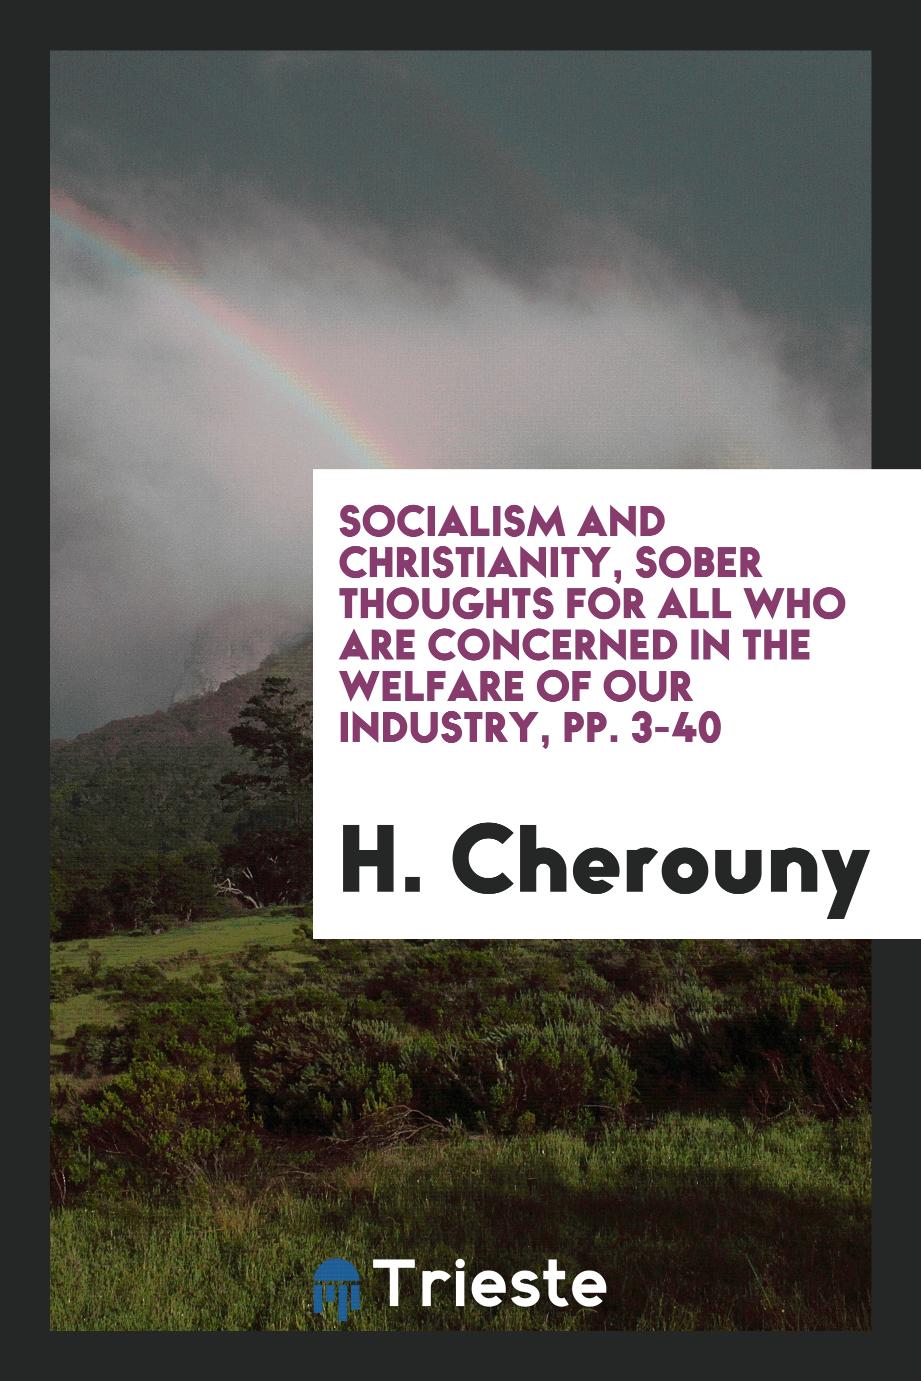 Socialism and Christianity, Sober Thoughts for All who are Concerned in the Welfare of Our Industry, pp. 3-40